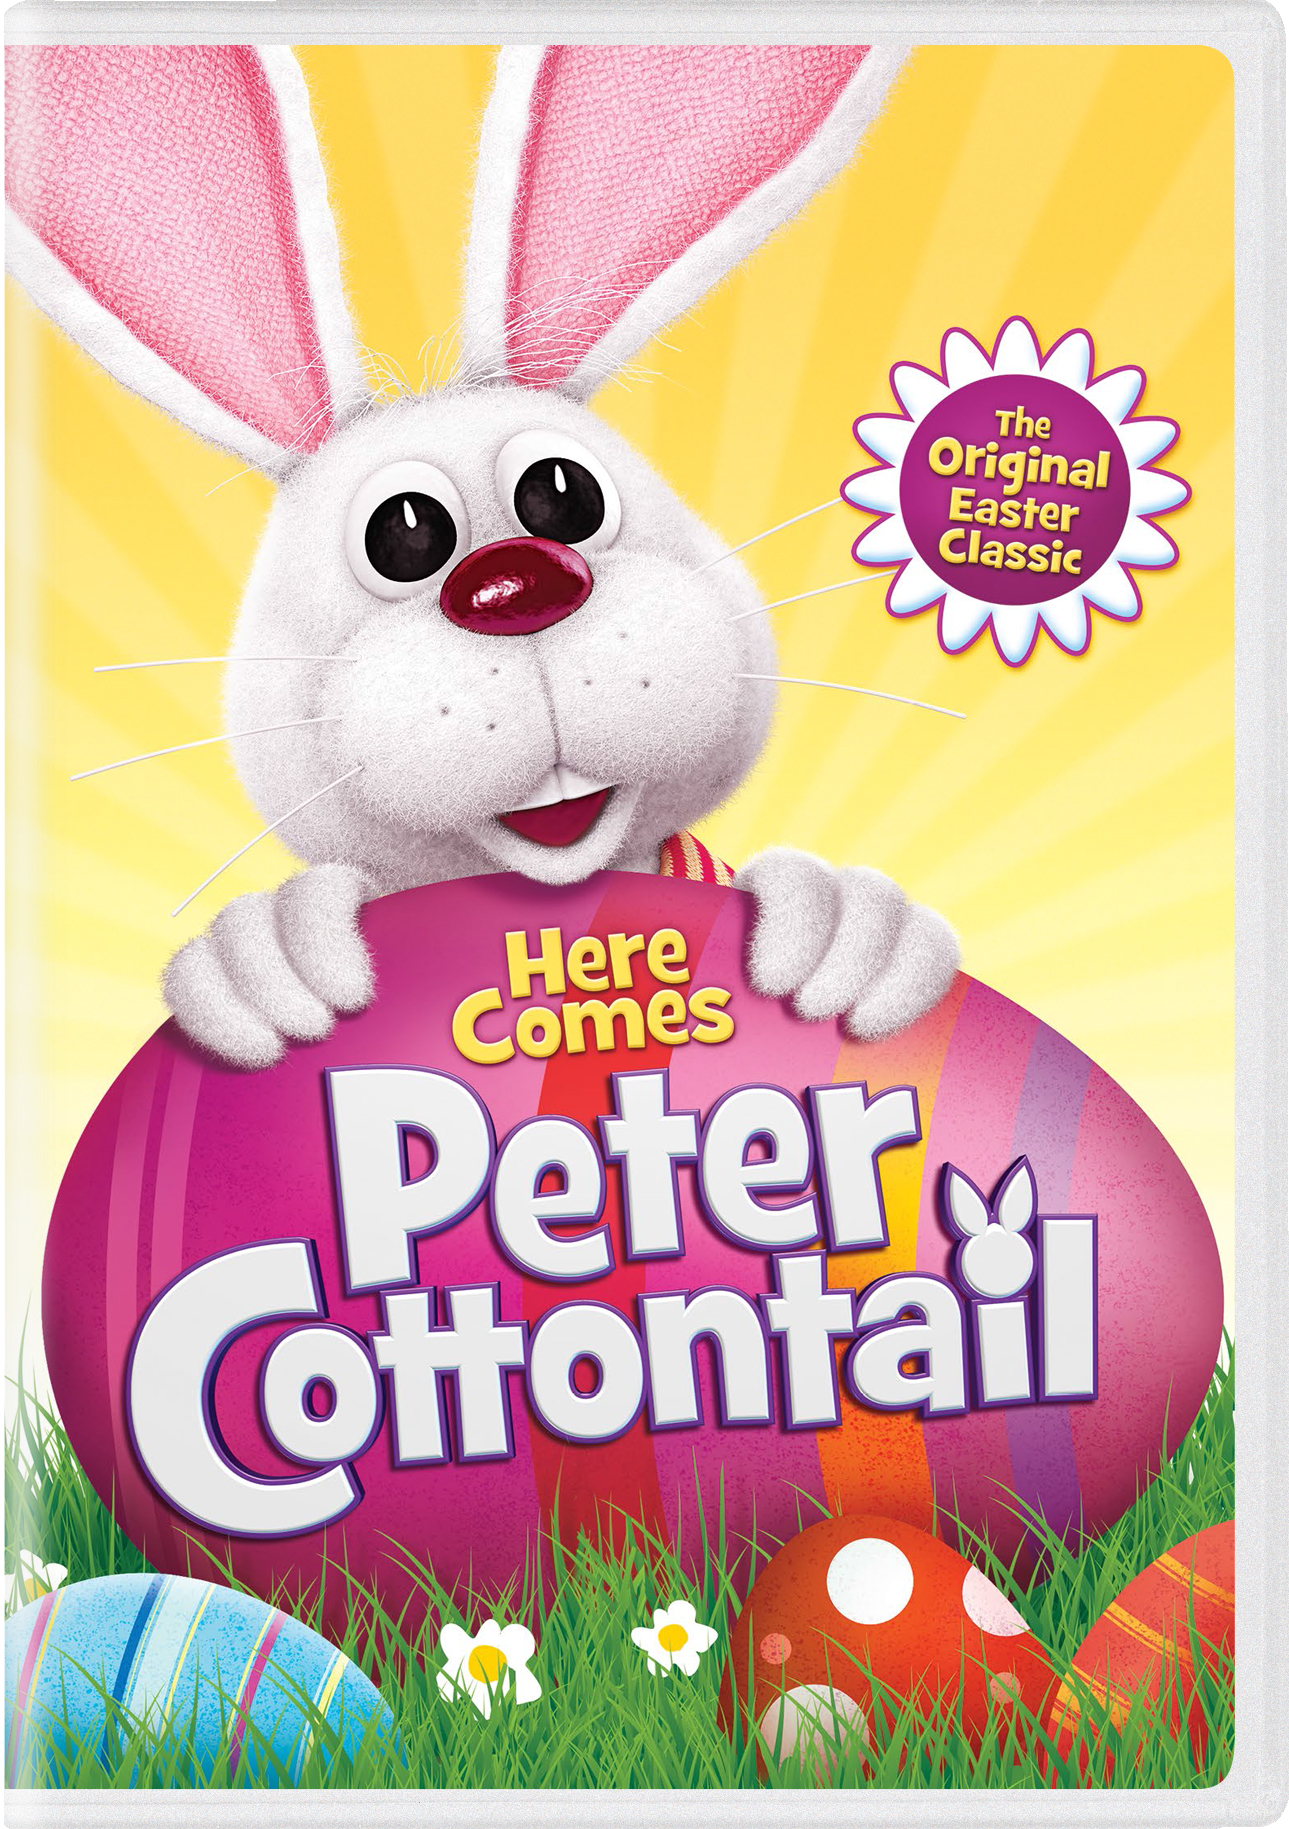 Here Comes Peter Cottontail (2018) - DVD   - Modern Classic Movies On DVD - Movies On GRUV